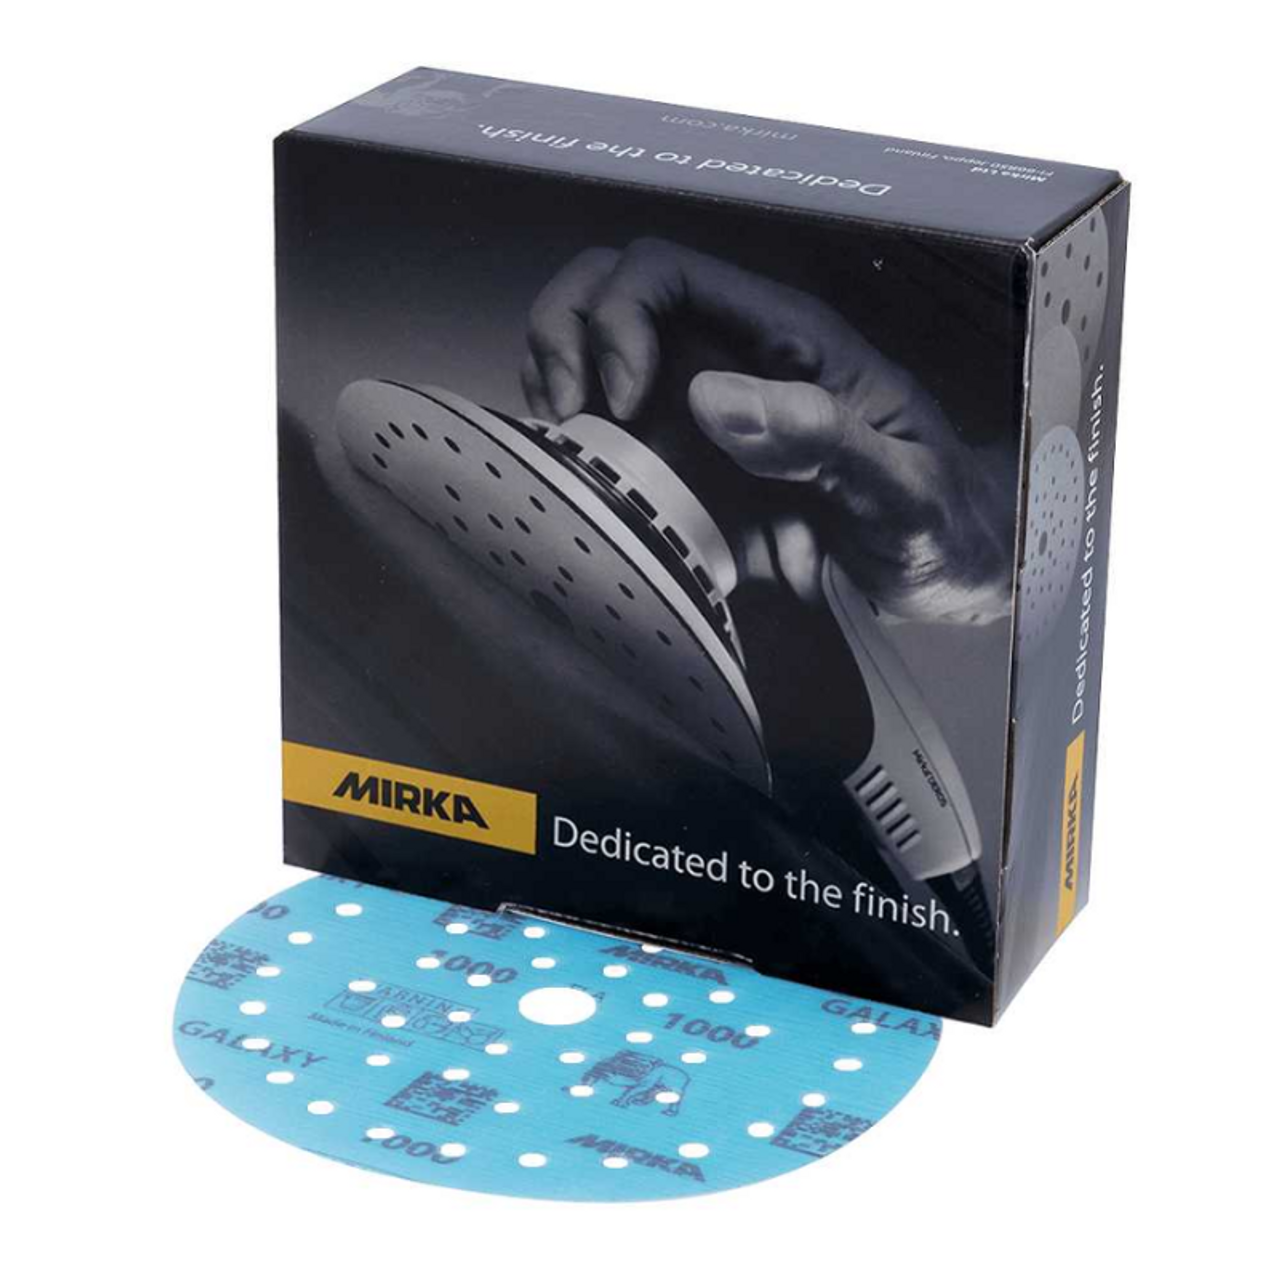 MIRKA Abrasives | GALAXY Sanding Discs with 150mm / 6" for Woodwork, Carpentry and Construction